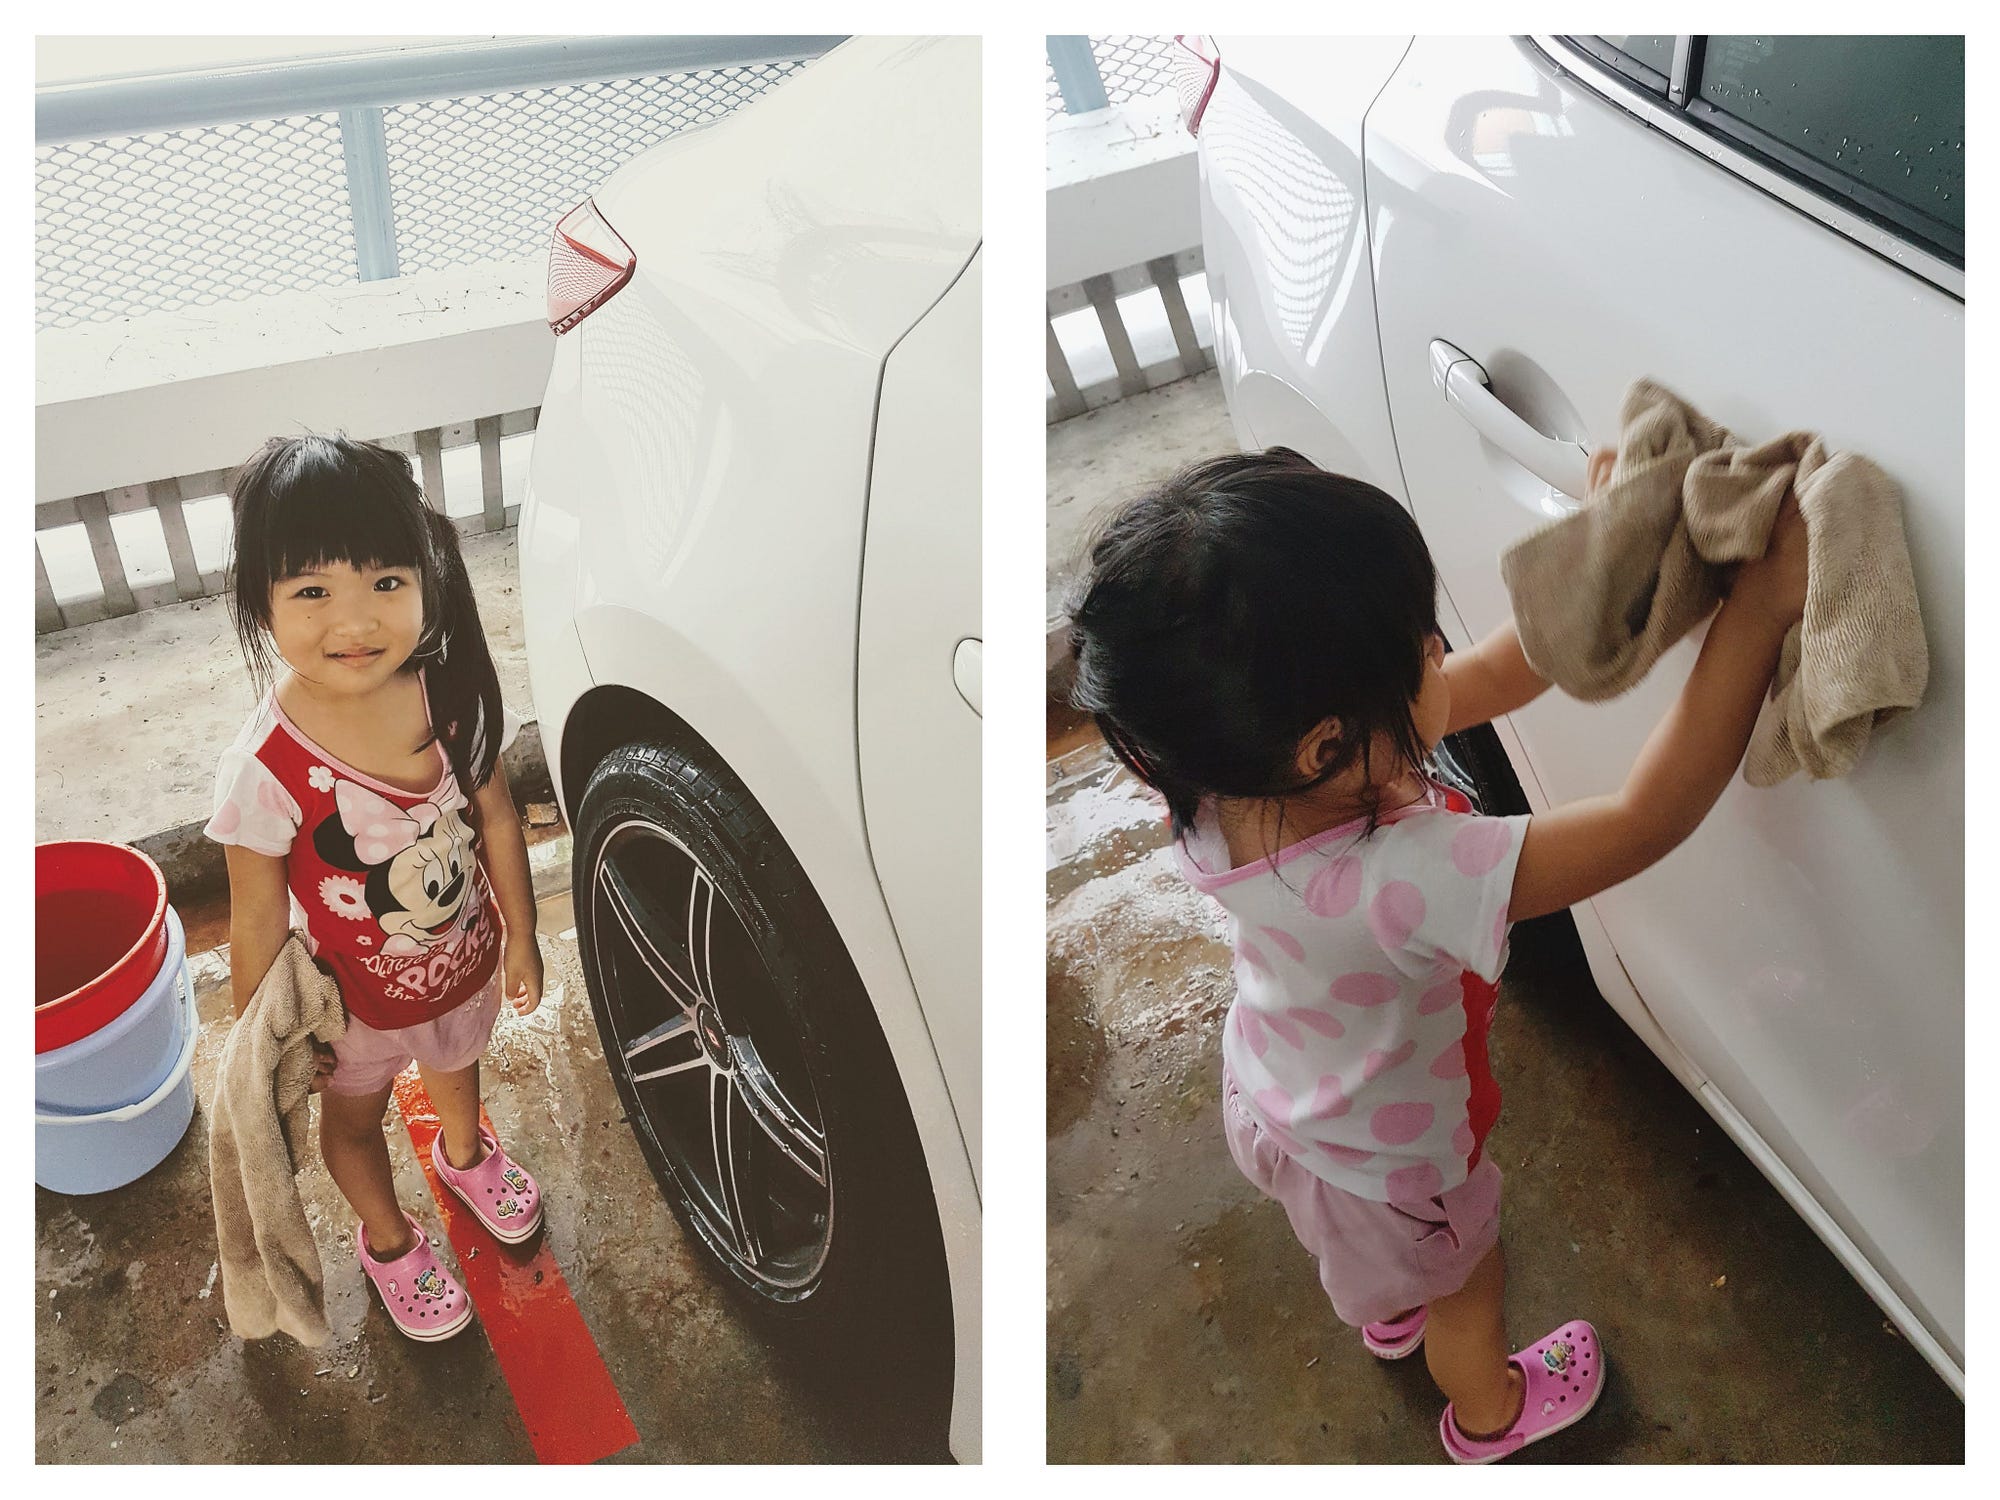 If You're Not Already Making Your Kids Clean Your Car, You're